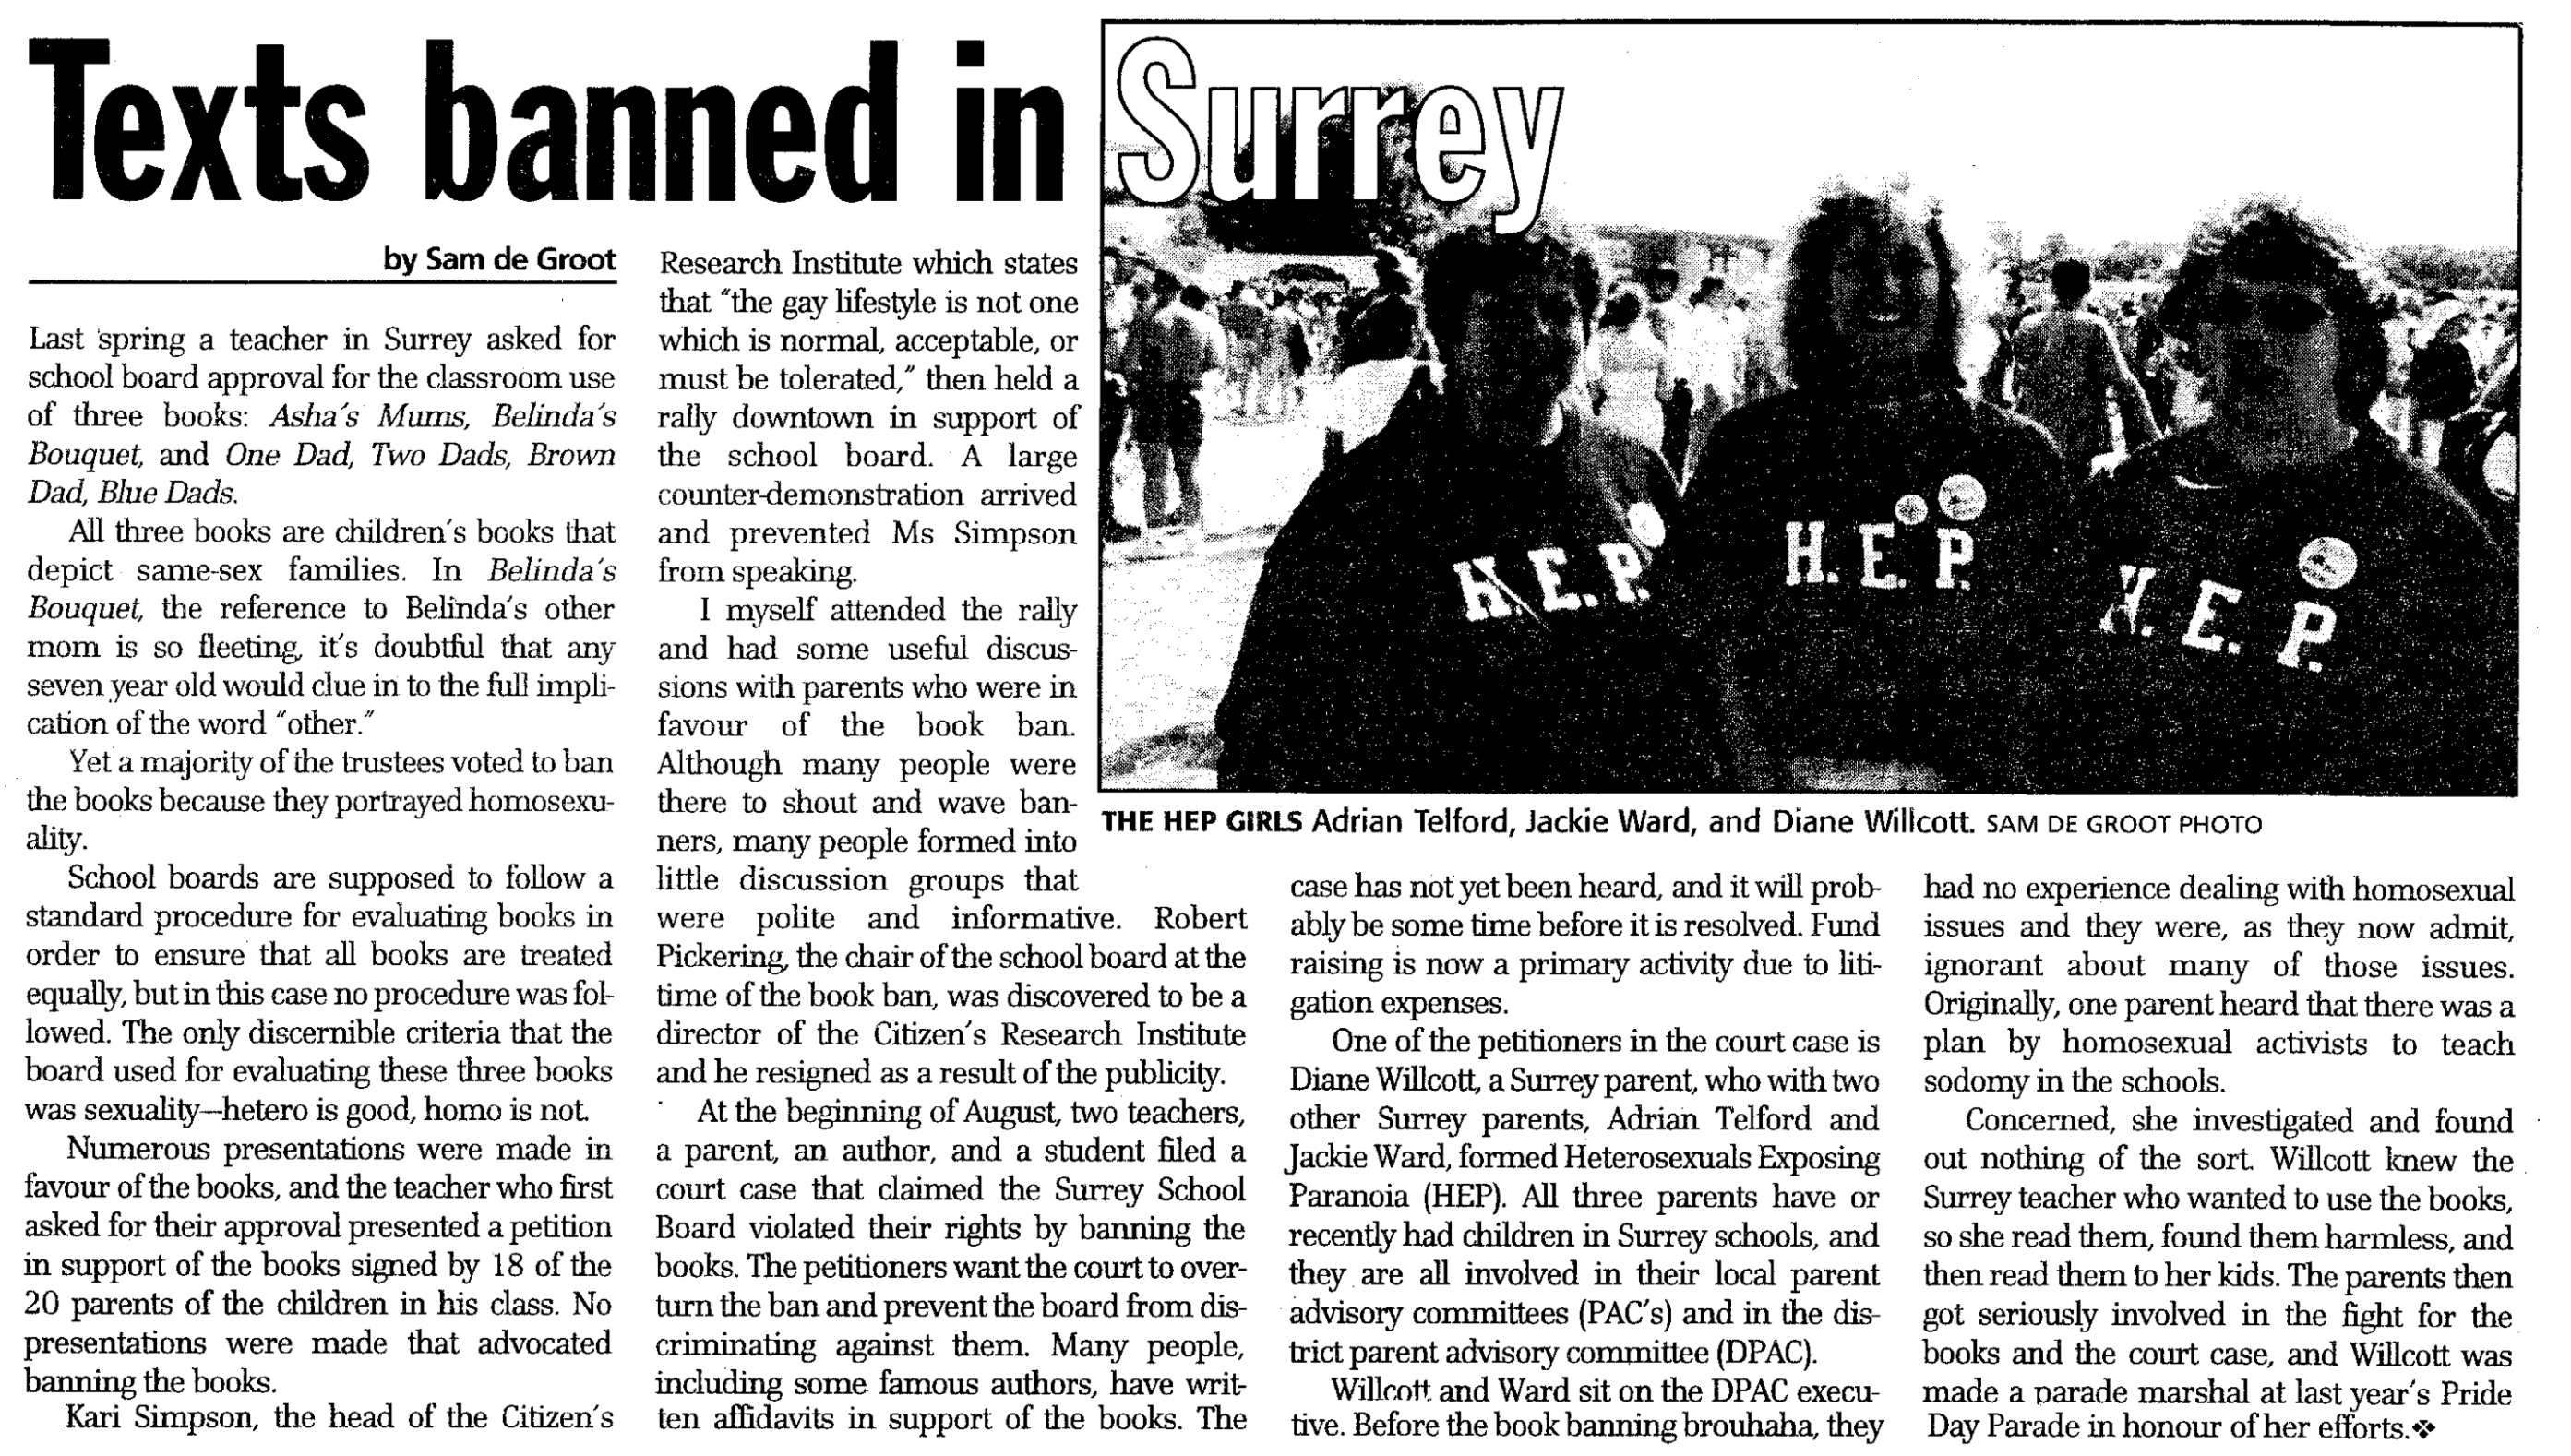 In March 2023, 25 years after the article above was published, the Chiliwack RCMP investigated books in school libraries containing 2SLGBTQIA+ and anti-racist content, responding to complaints from a far-right conspiracy group.